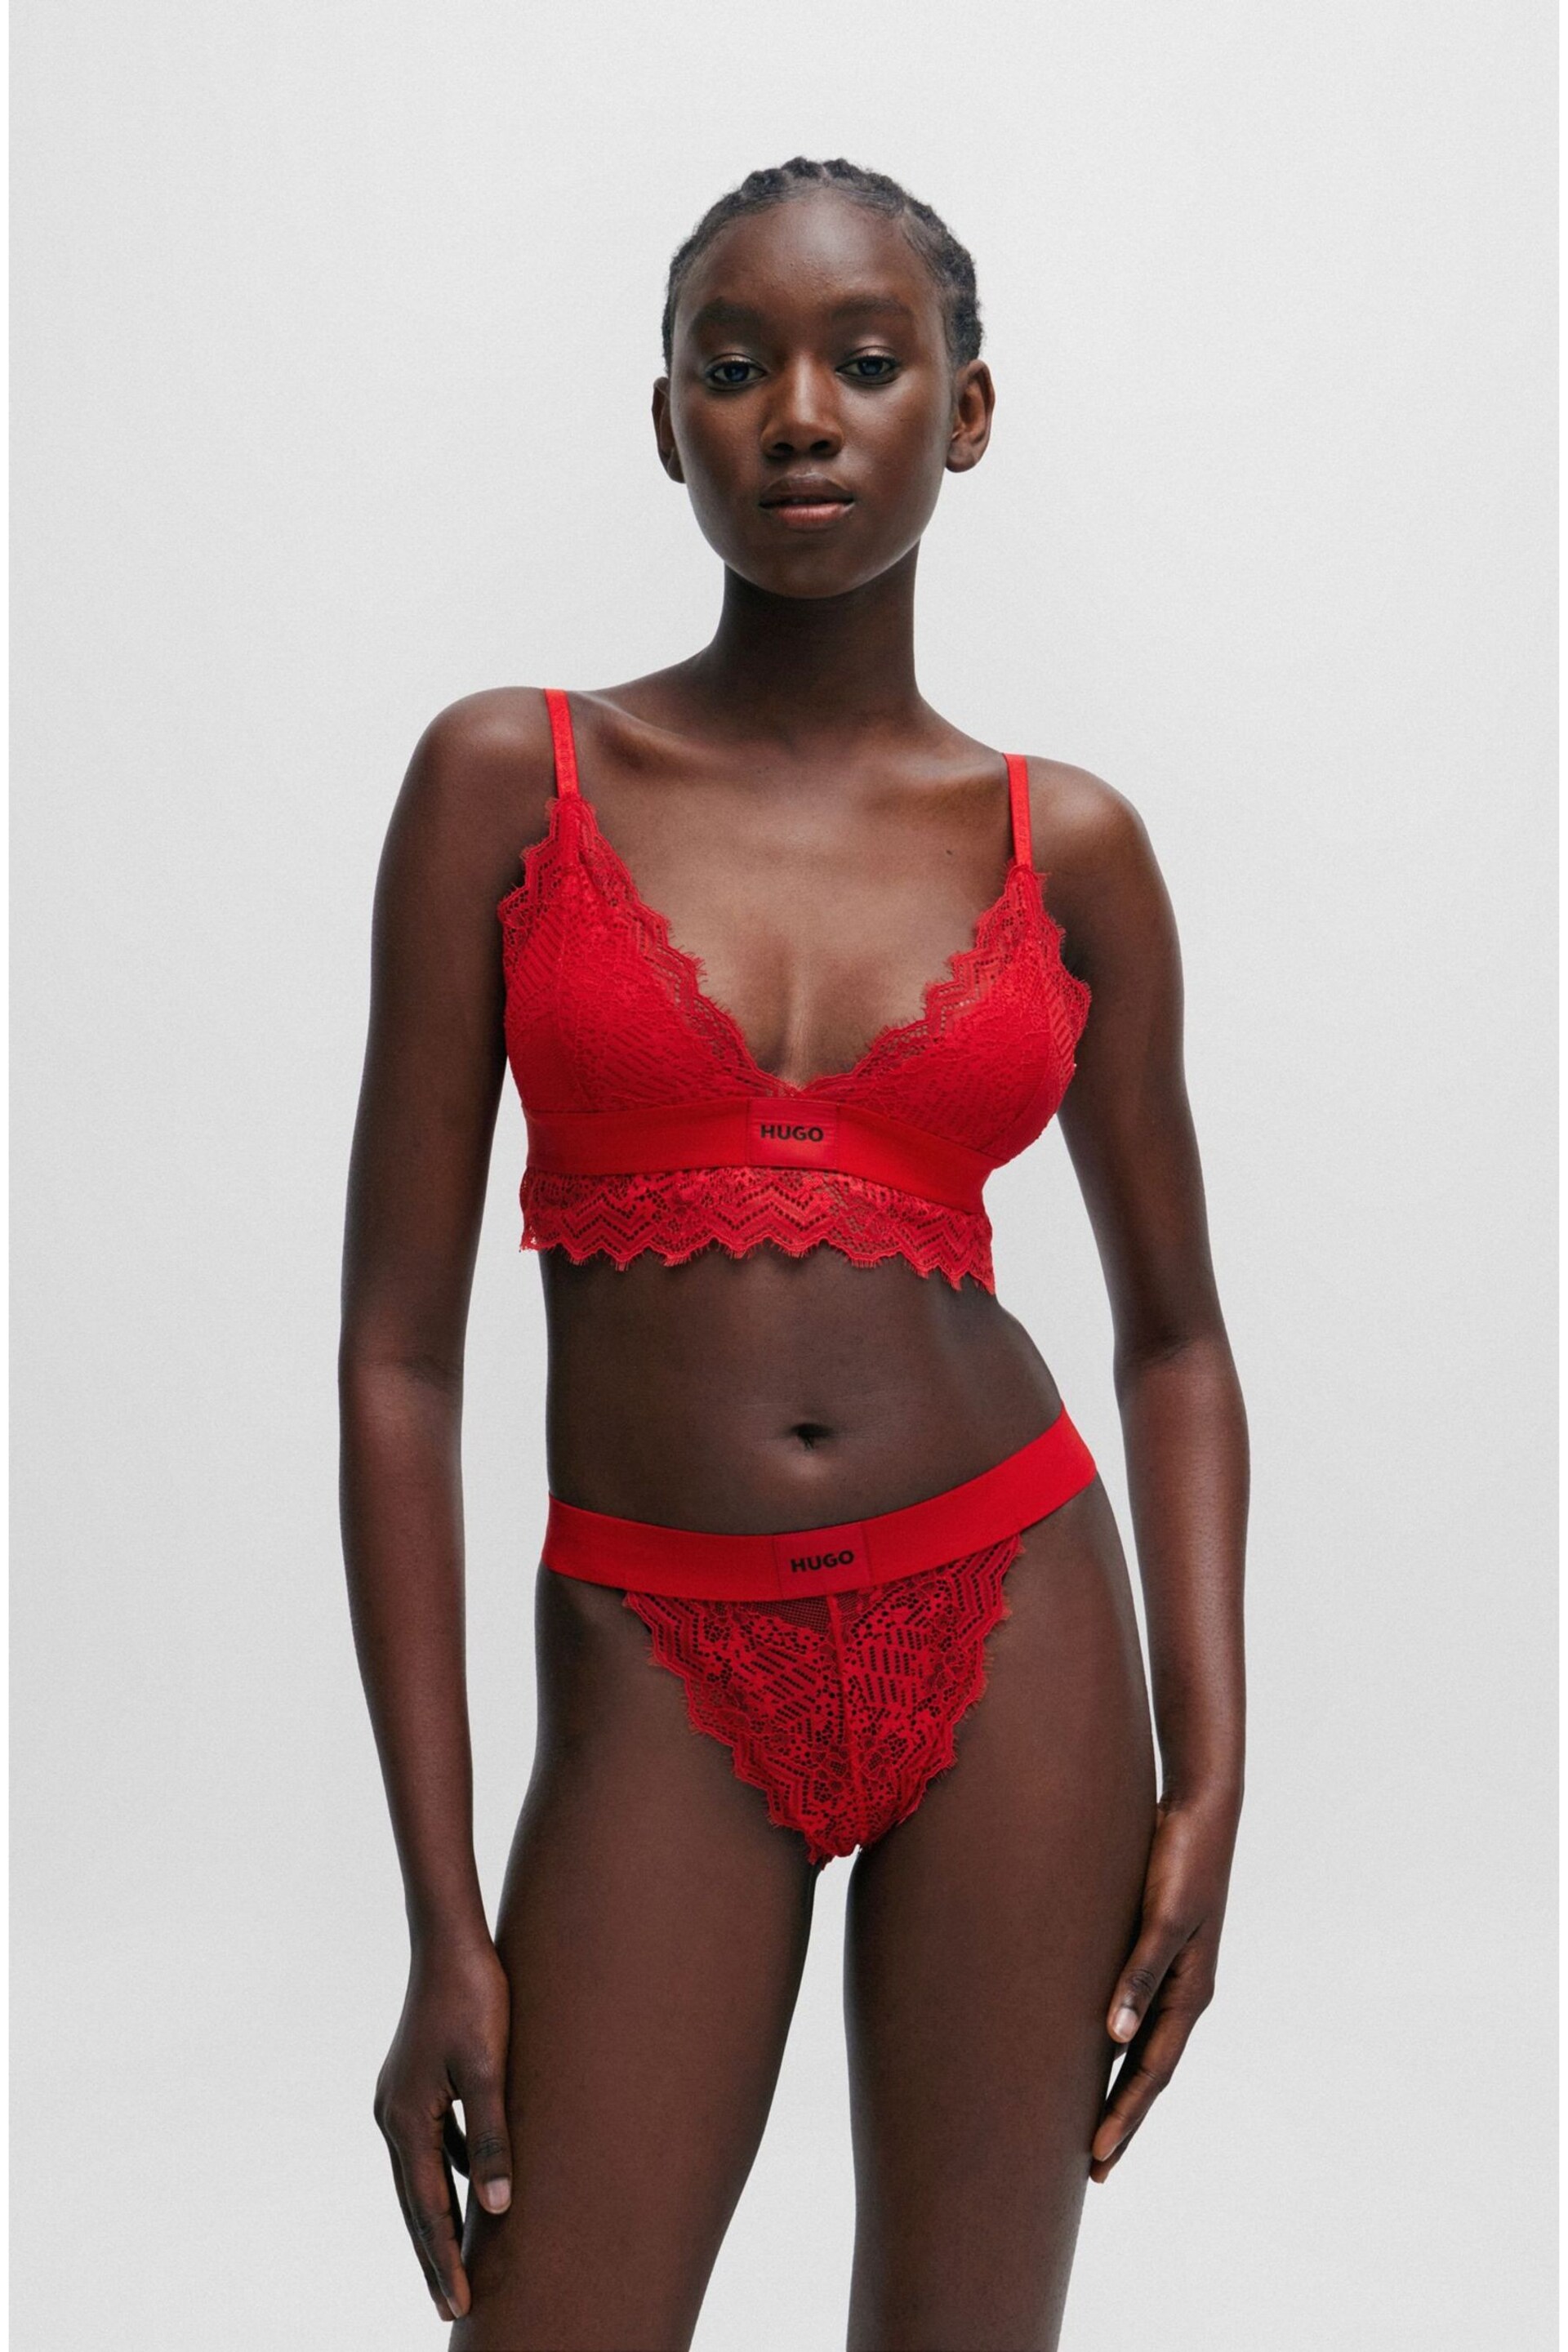 HUGO Red Padded Triangle Bra in Geometric Lace with Logo Label - Image 3 of 5